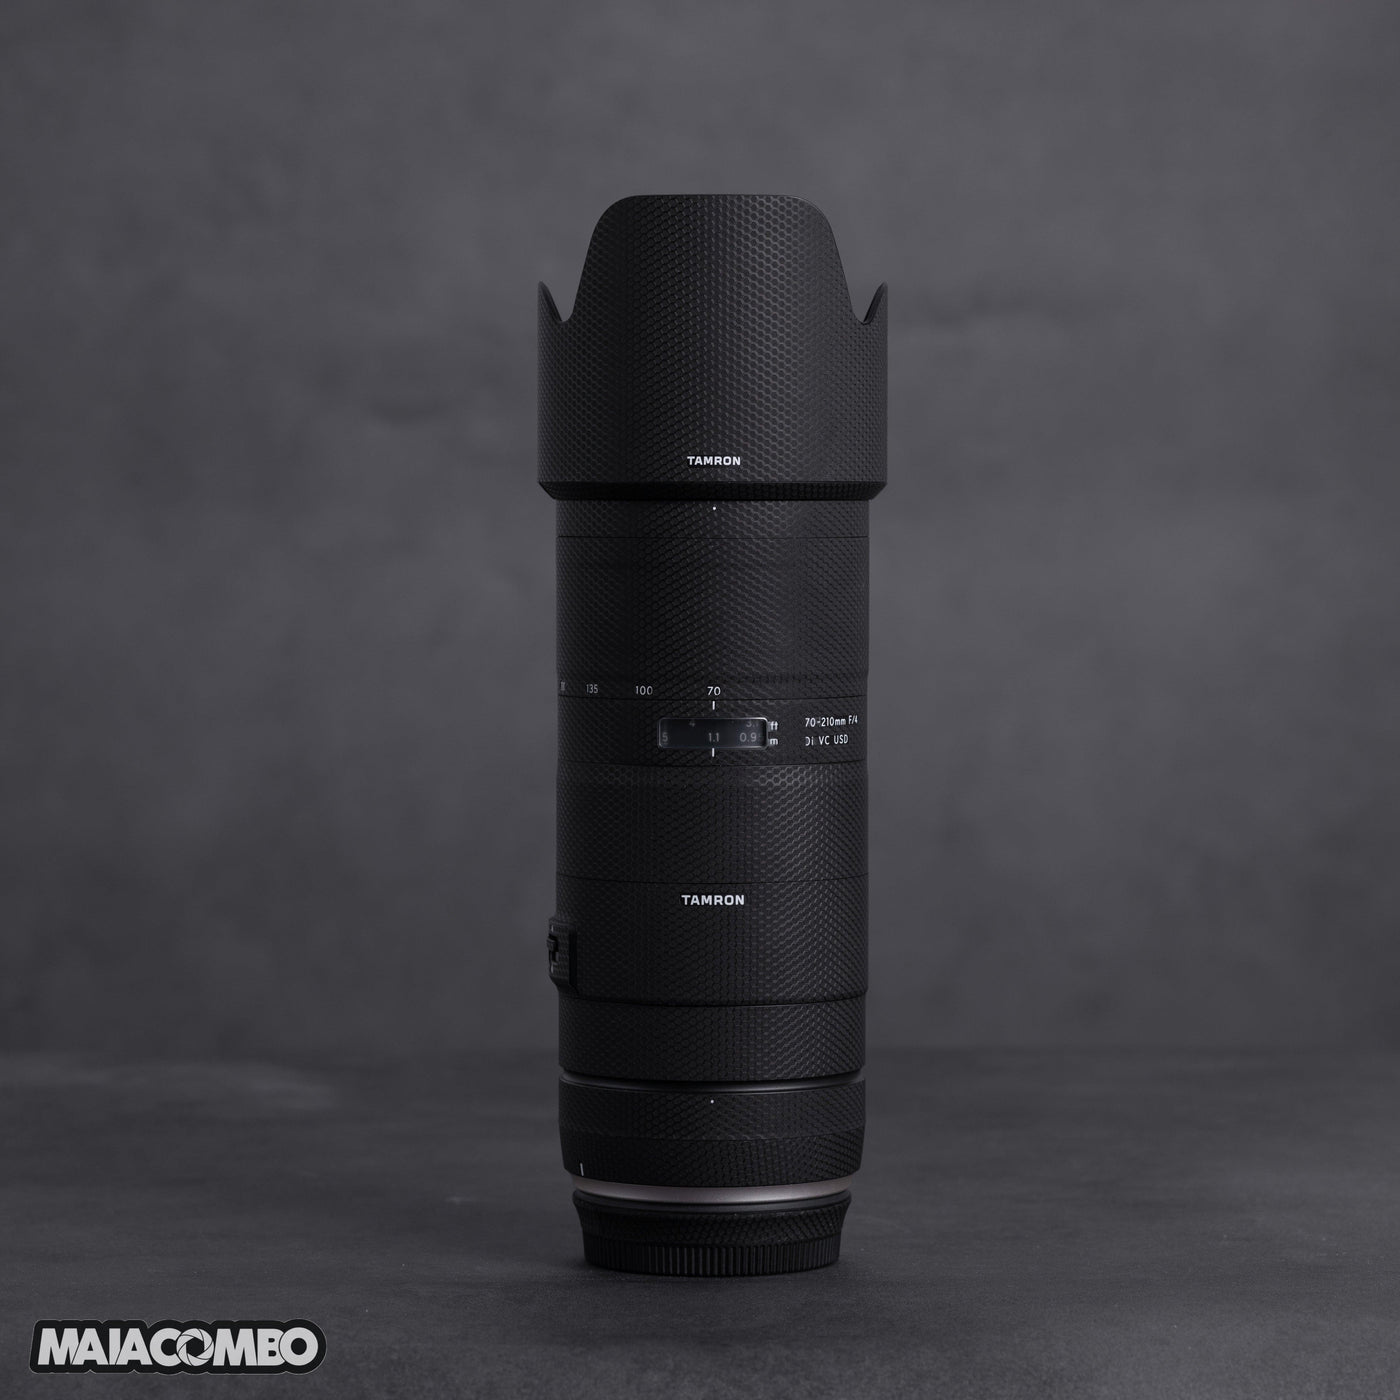 TAMRON 70-210mm F4 Lens Skin For CANON - MAIACOMBO